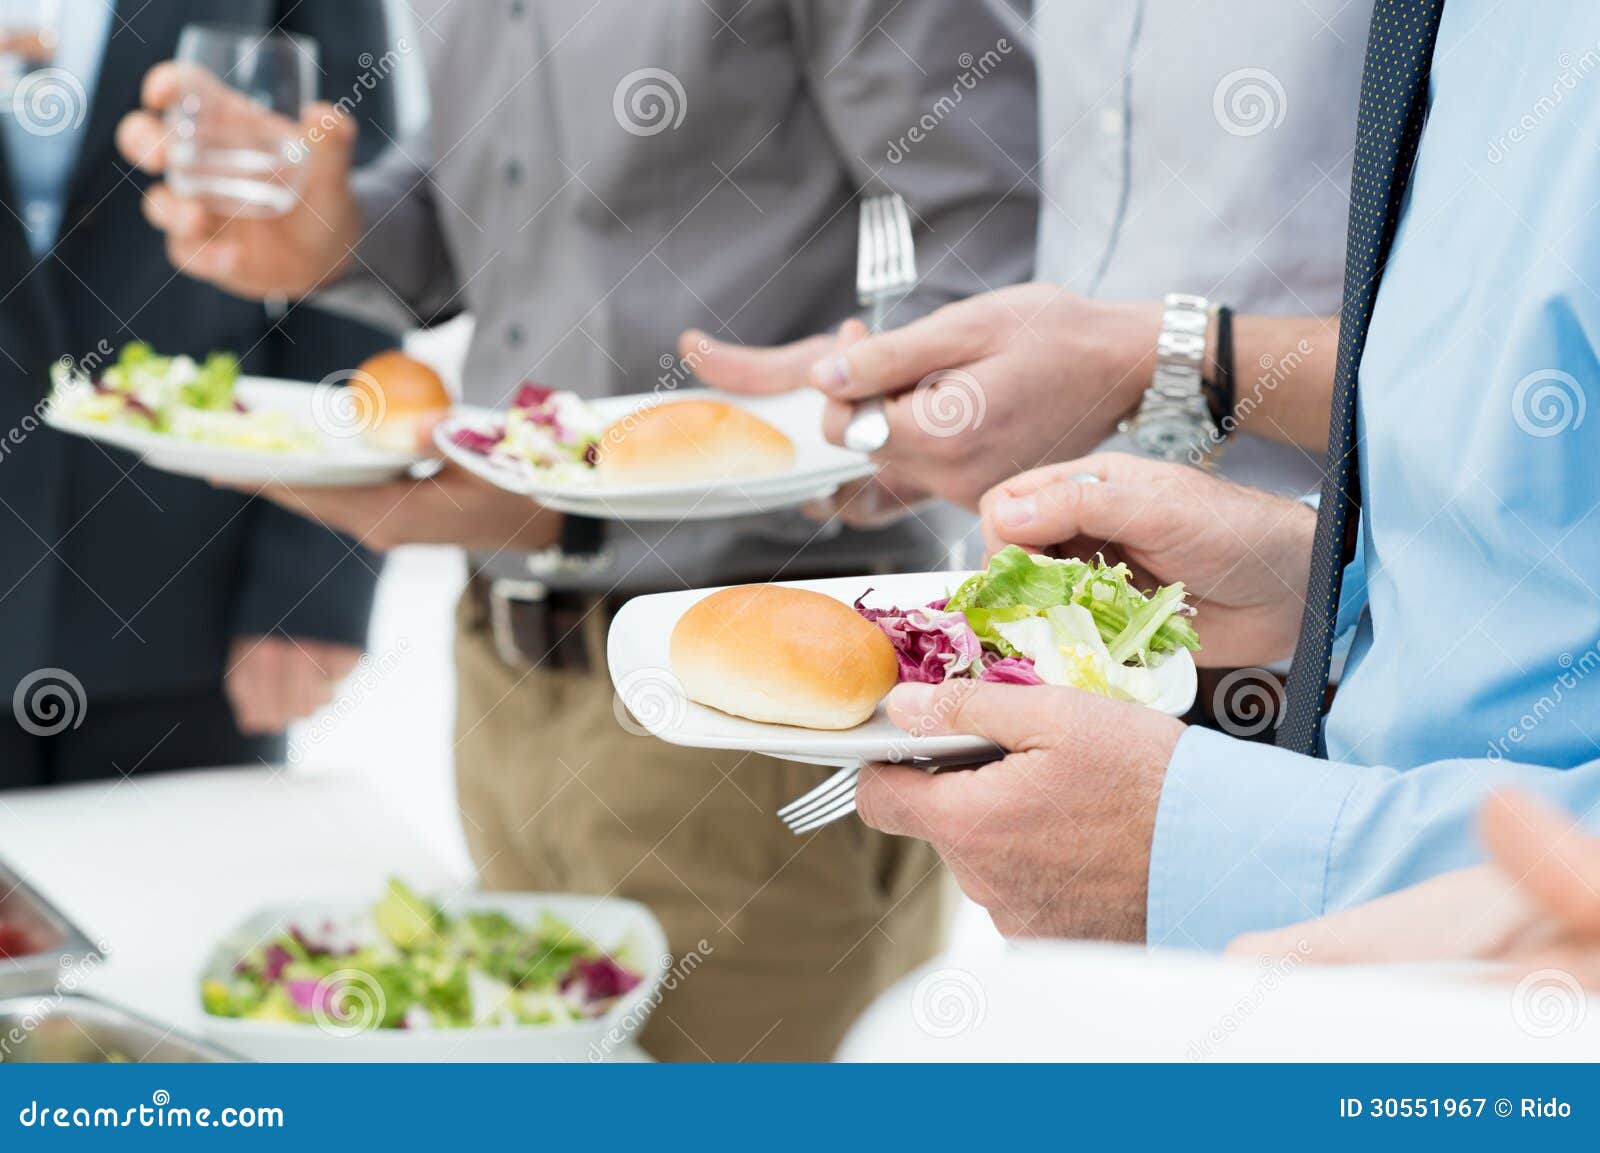 business lunch detail